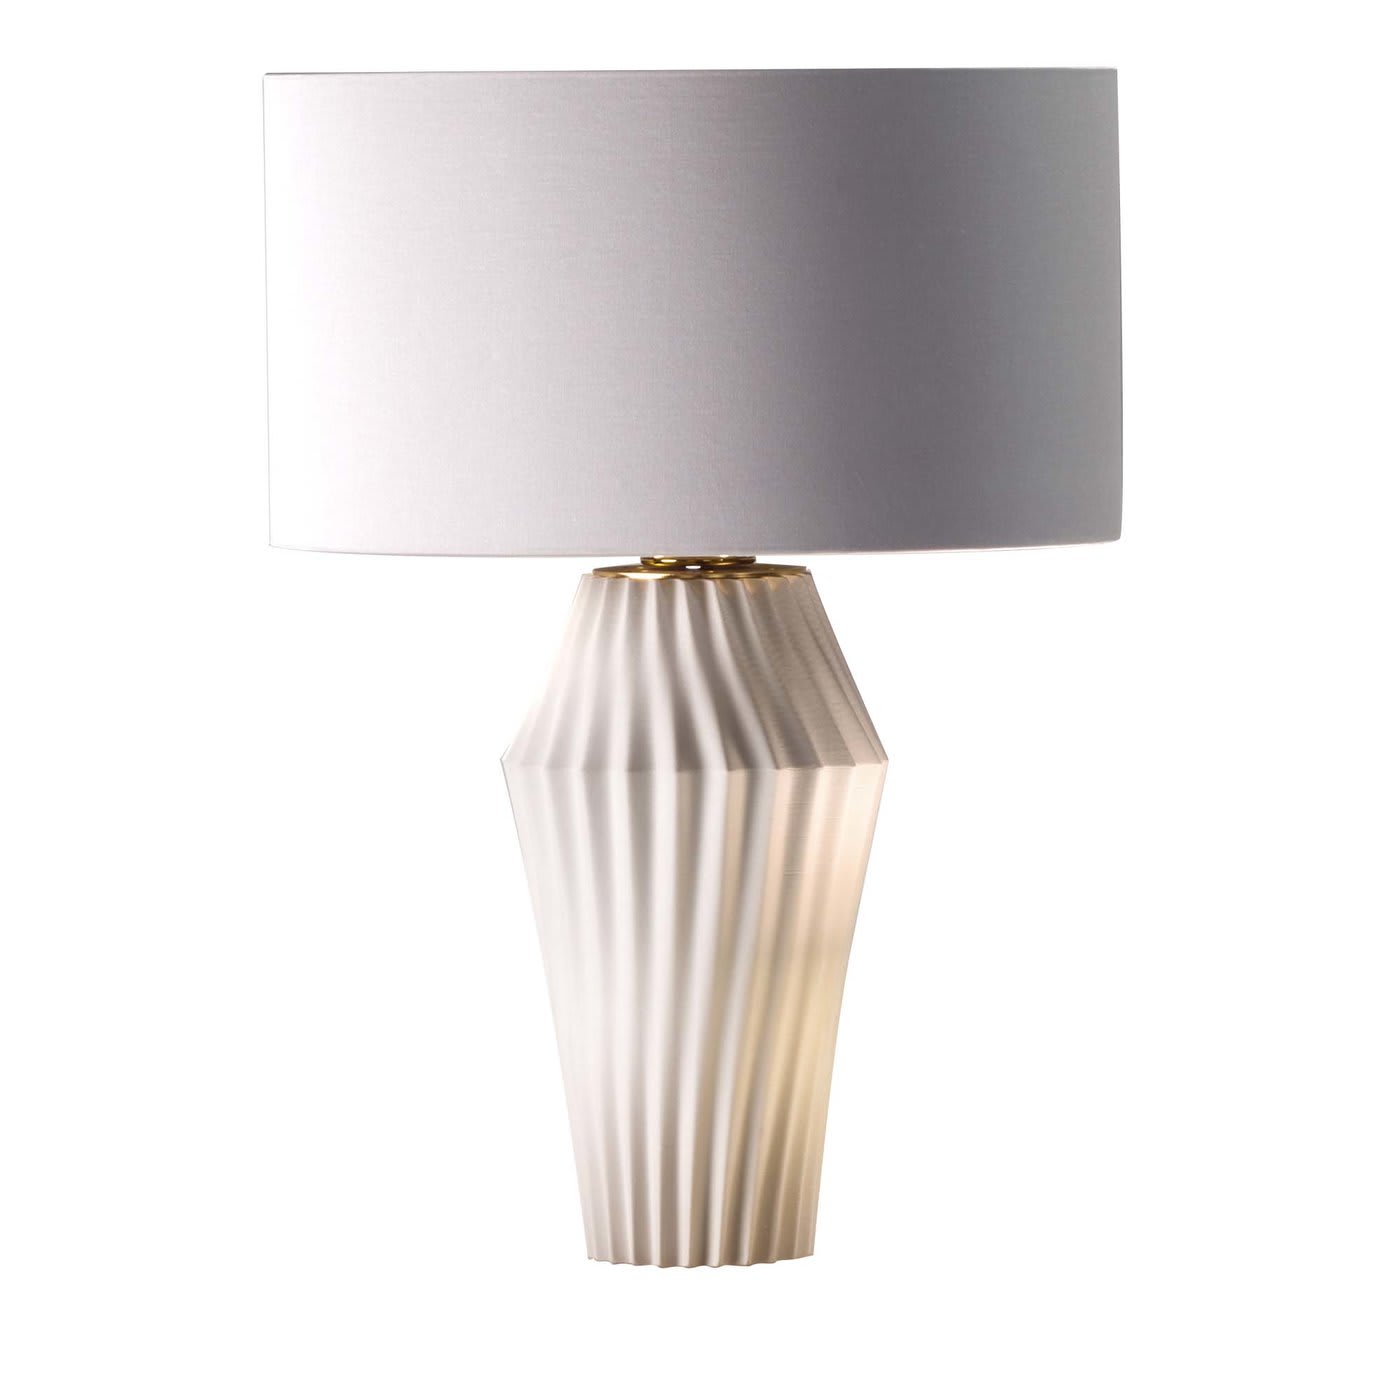 Fortuny Table Lamp - Villari Home Couture